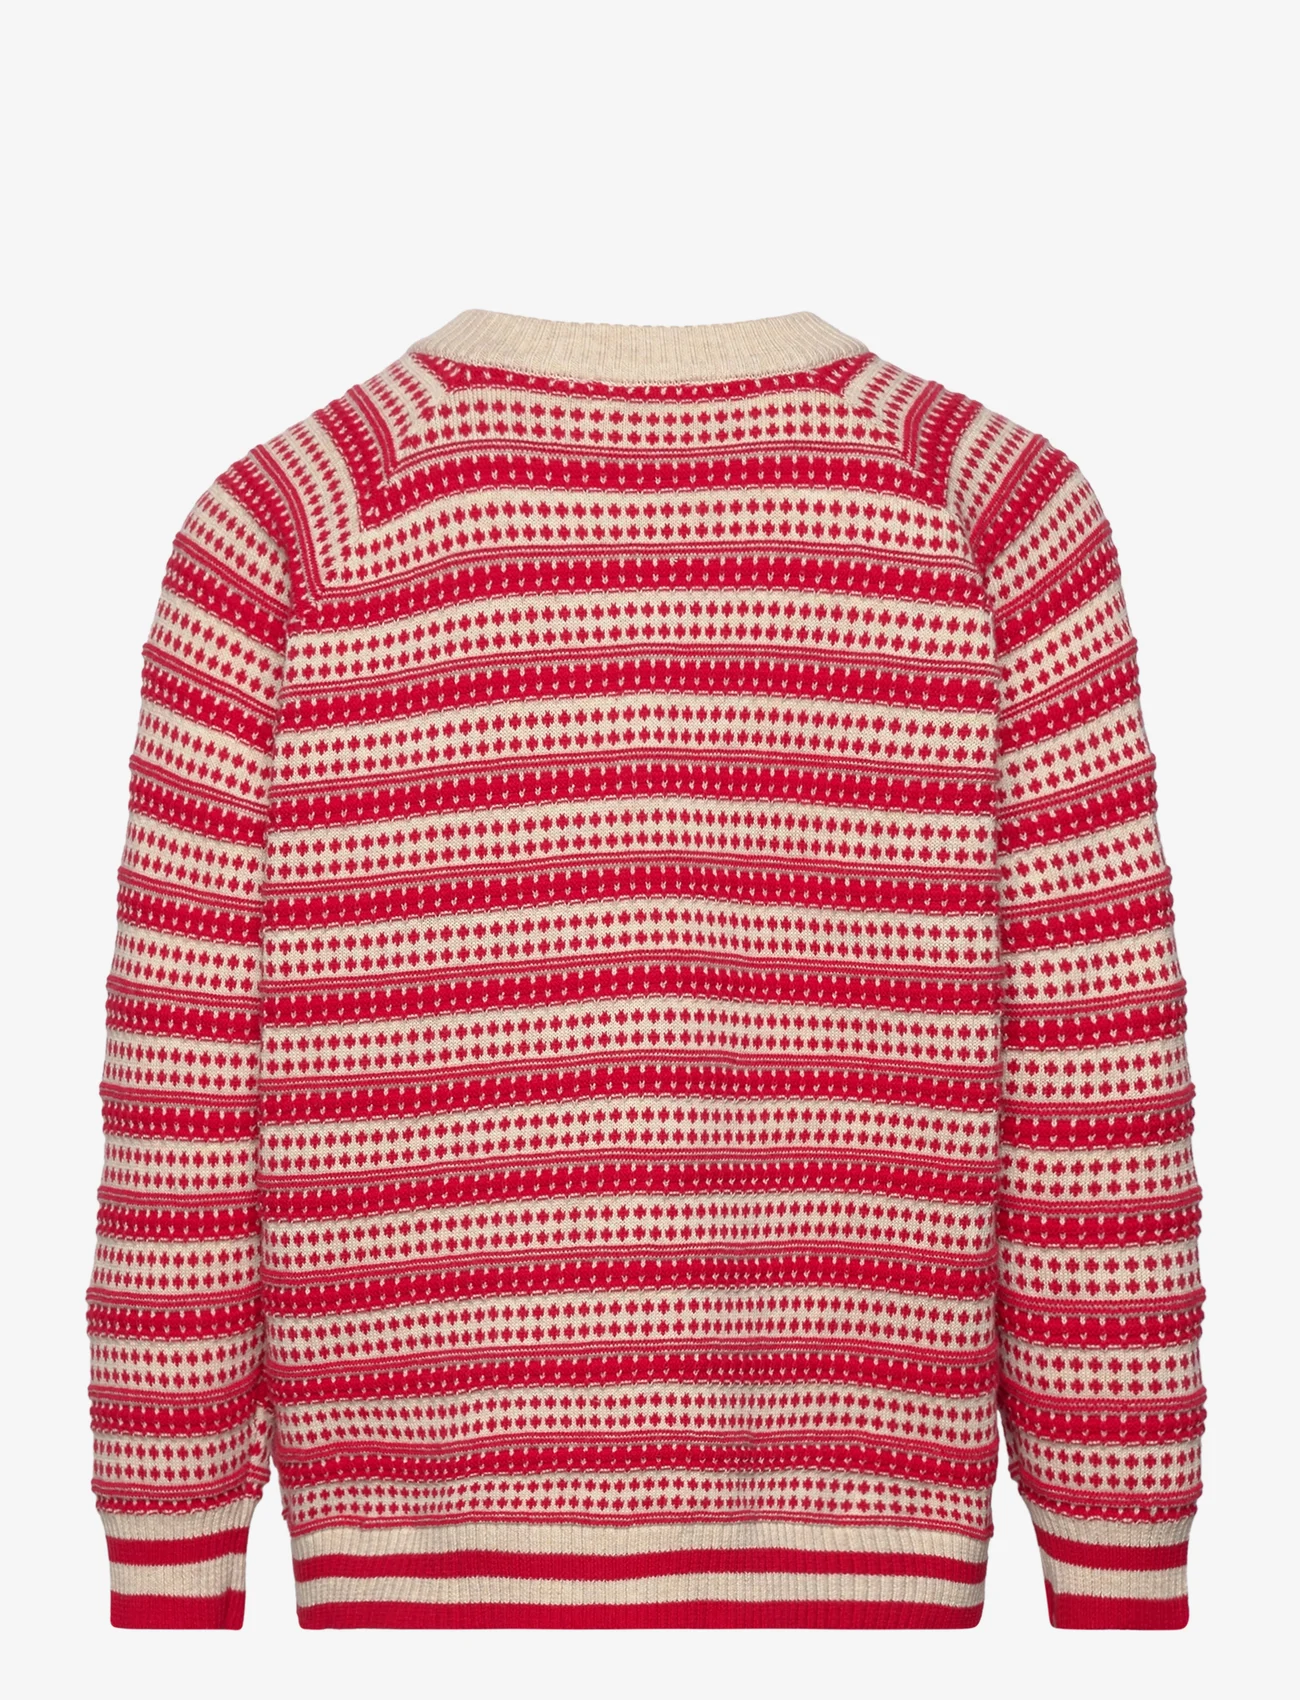 Petit Piao - O-Neck Light Nordic Knit Sweater - stickade tröjor - off white/ bright red - 1